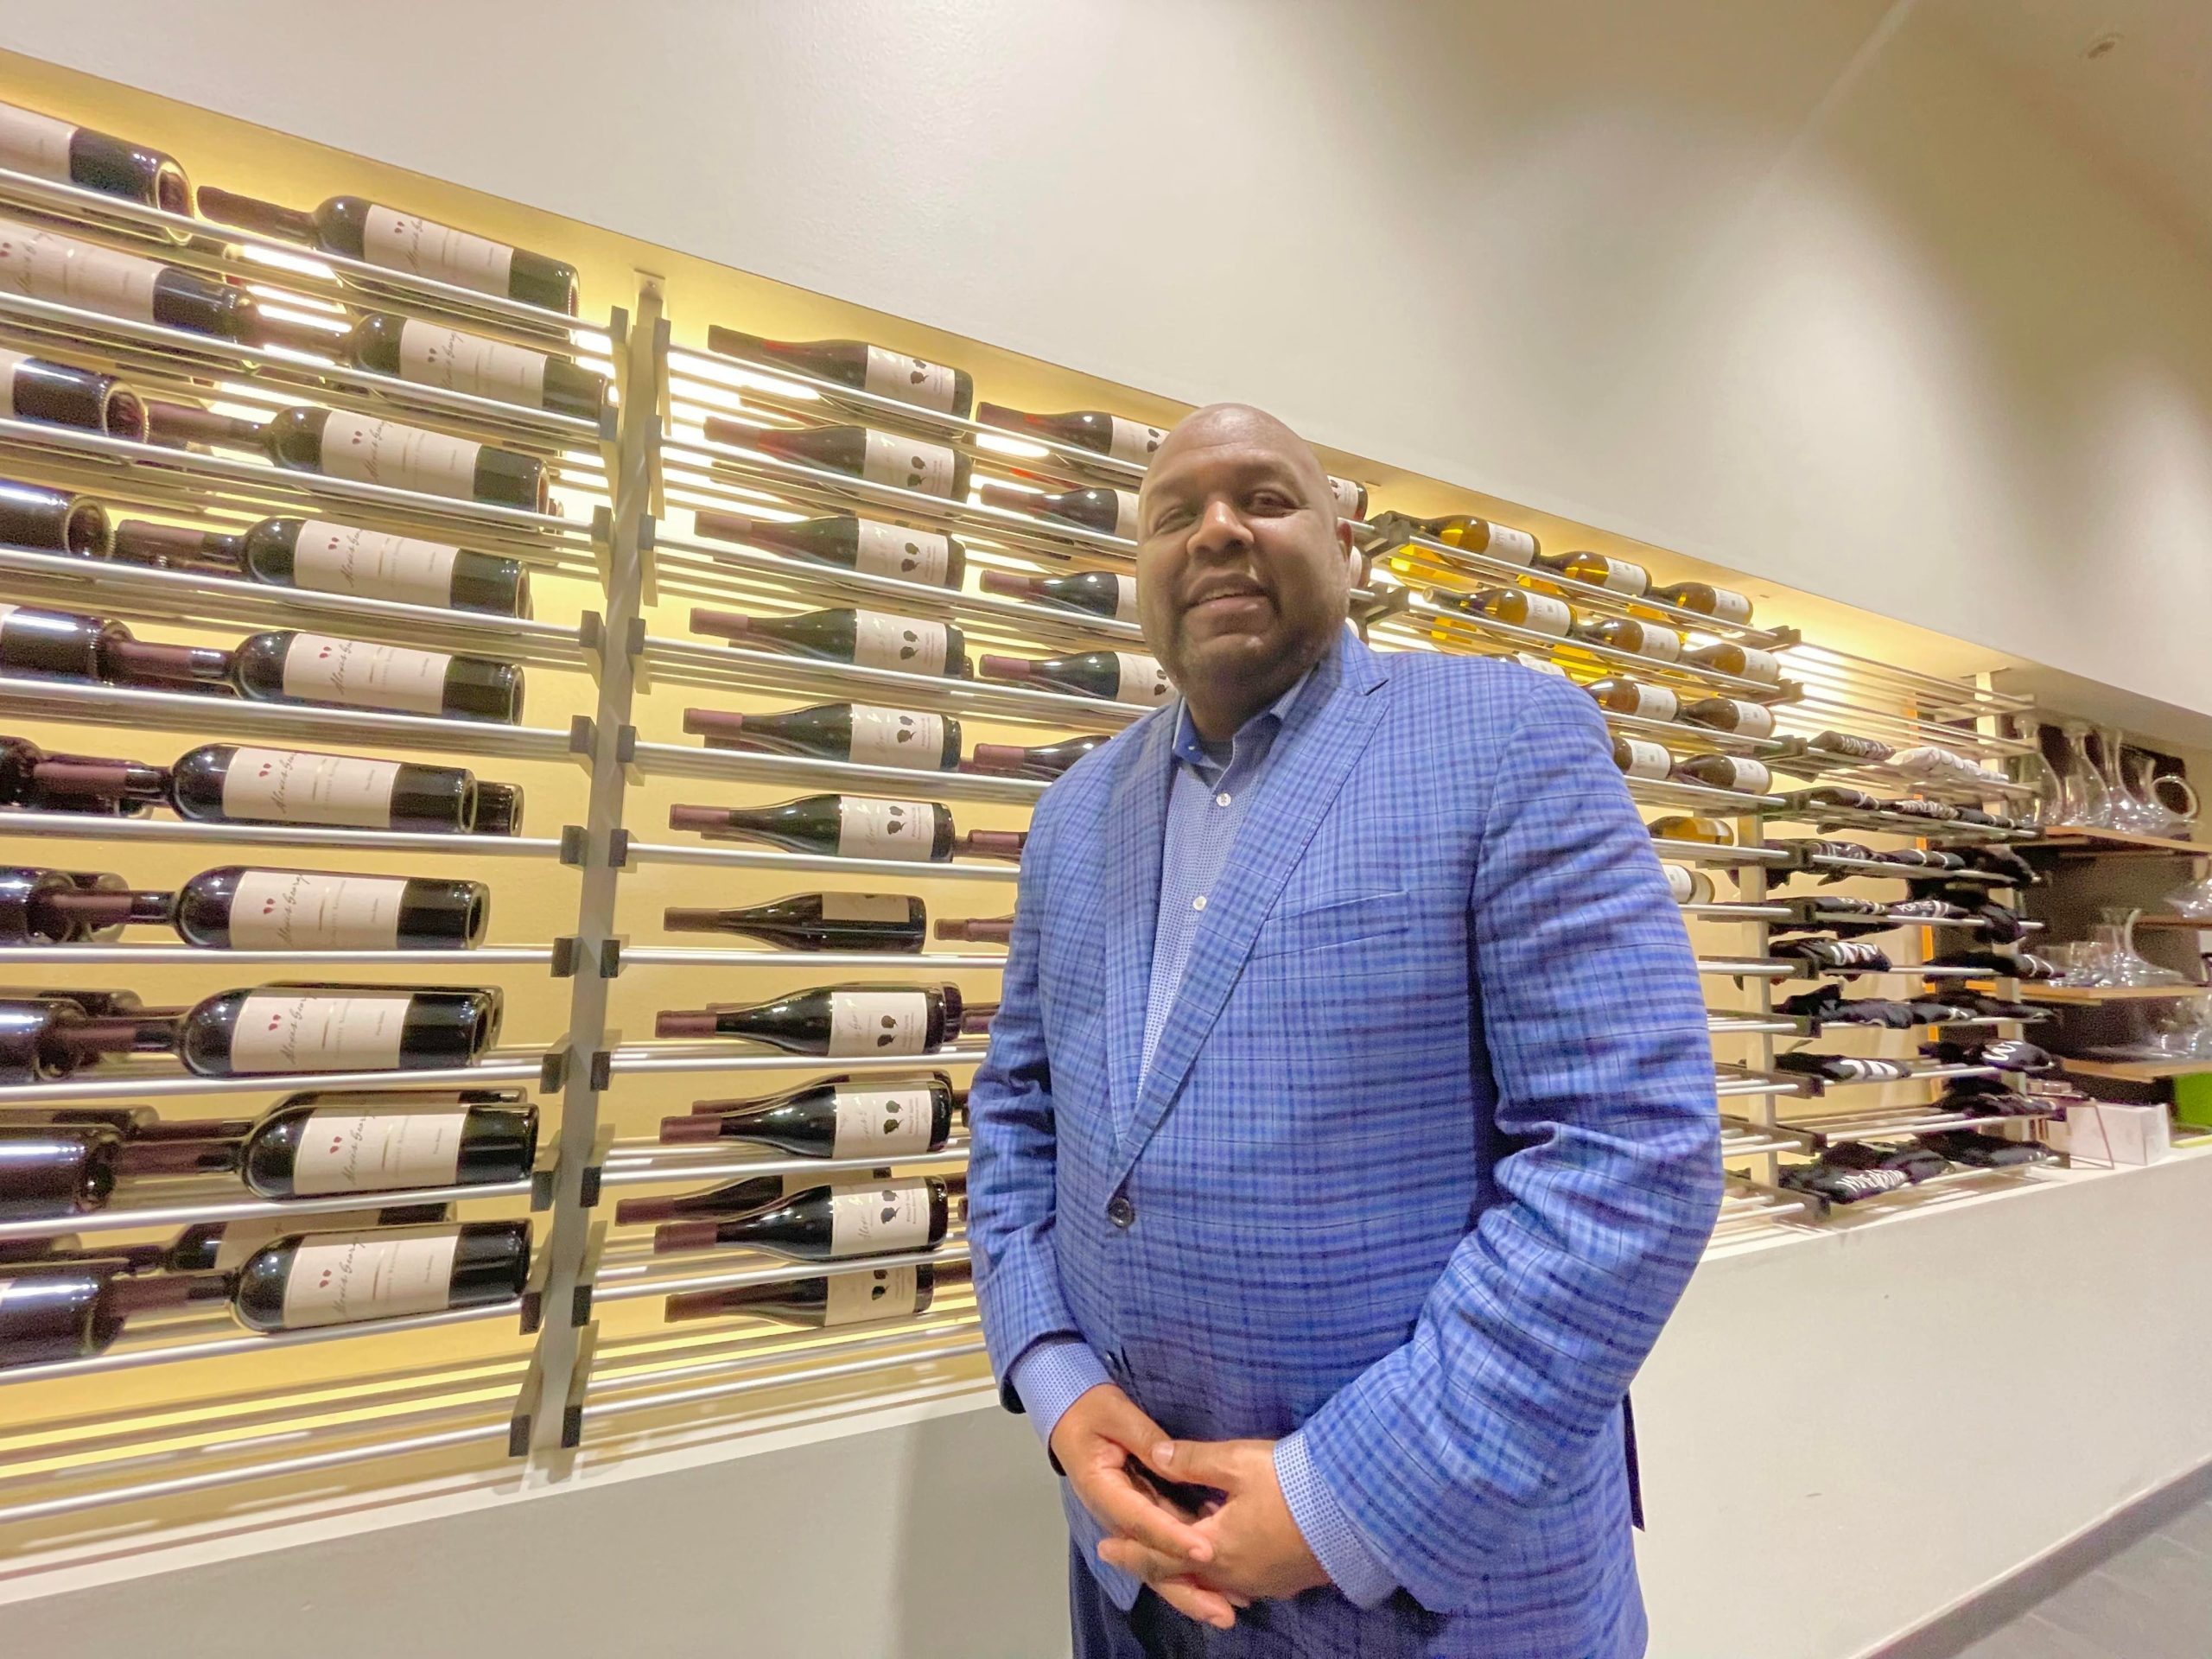 Black-Owned Winery Business Makes National Footprint, Giving Back is Focus